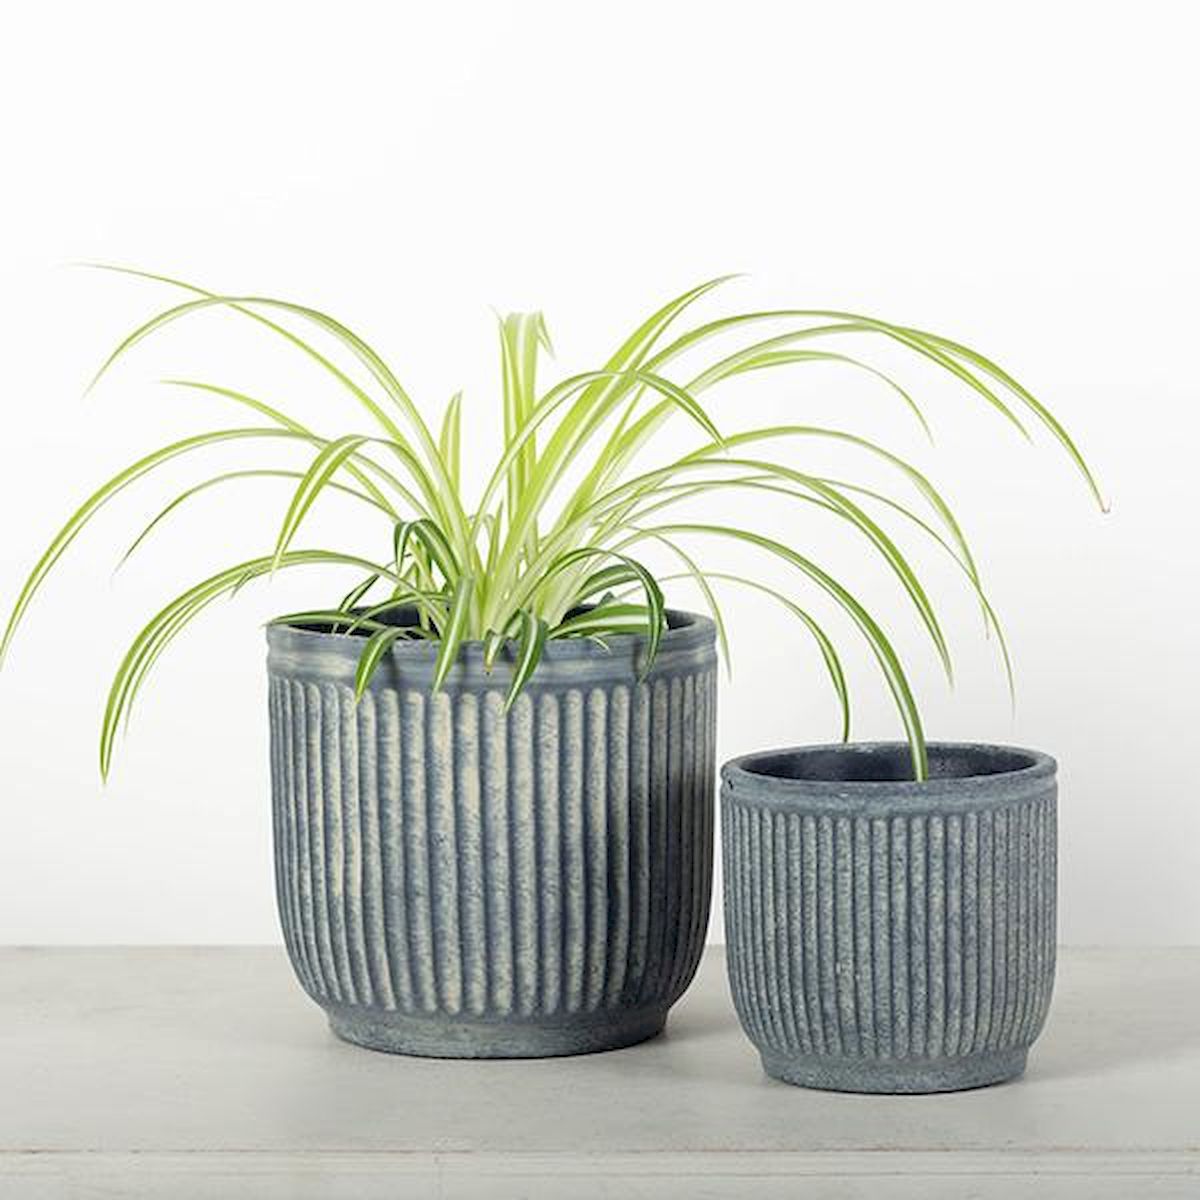 Campo Rustic Blue Planters - Set of 2